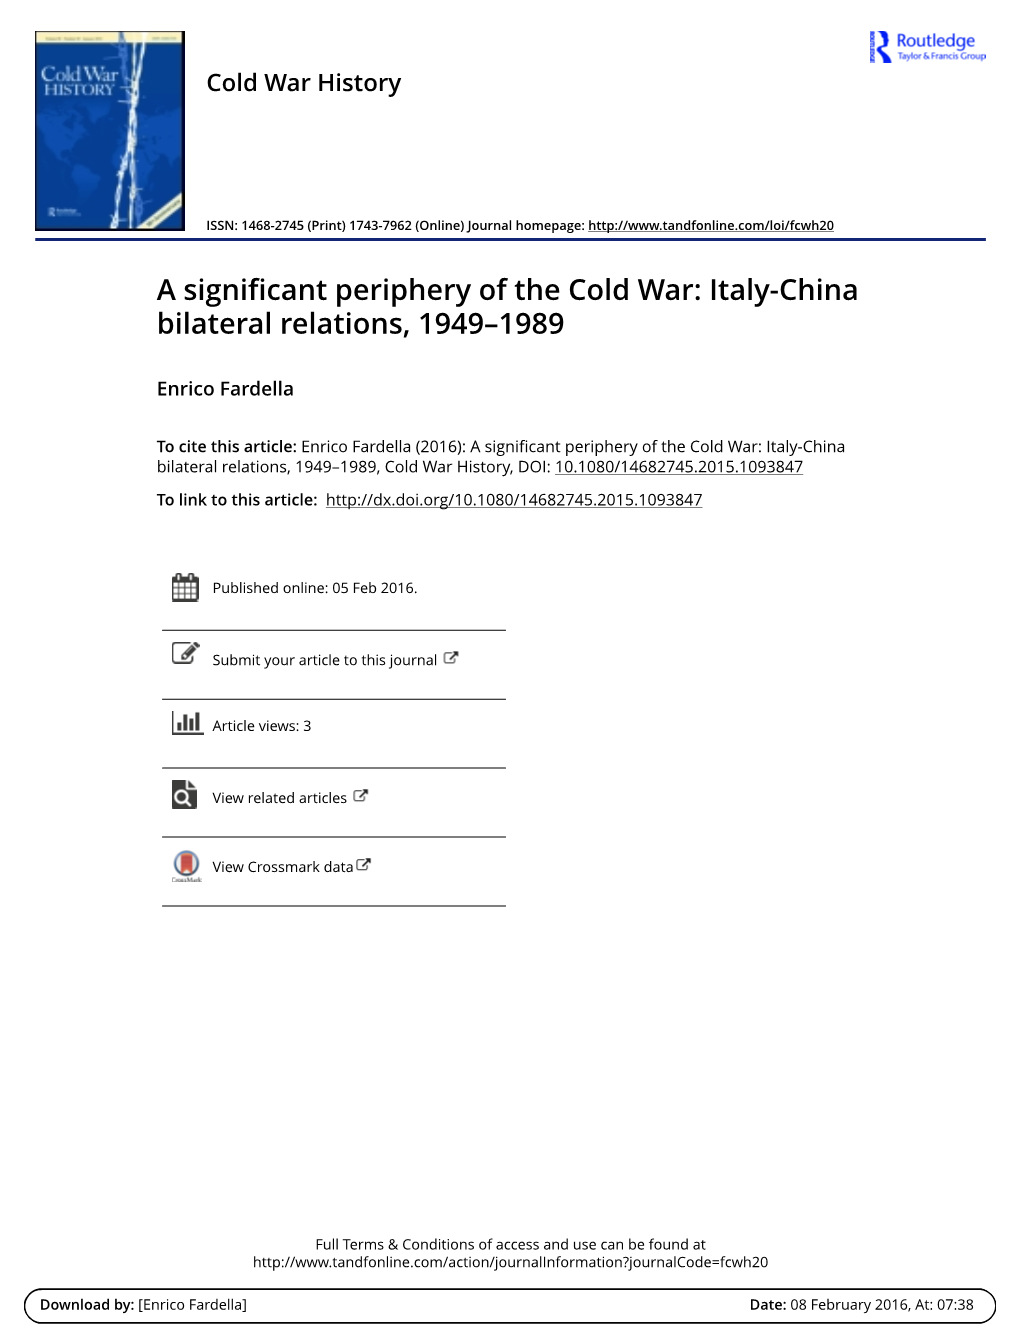 A Significant Periphery of the Cold War: Italy-China Bilateral Relations, 1949–1989